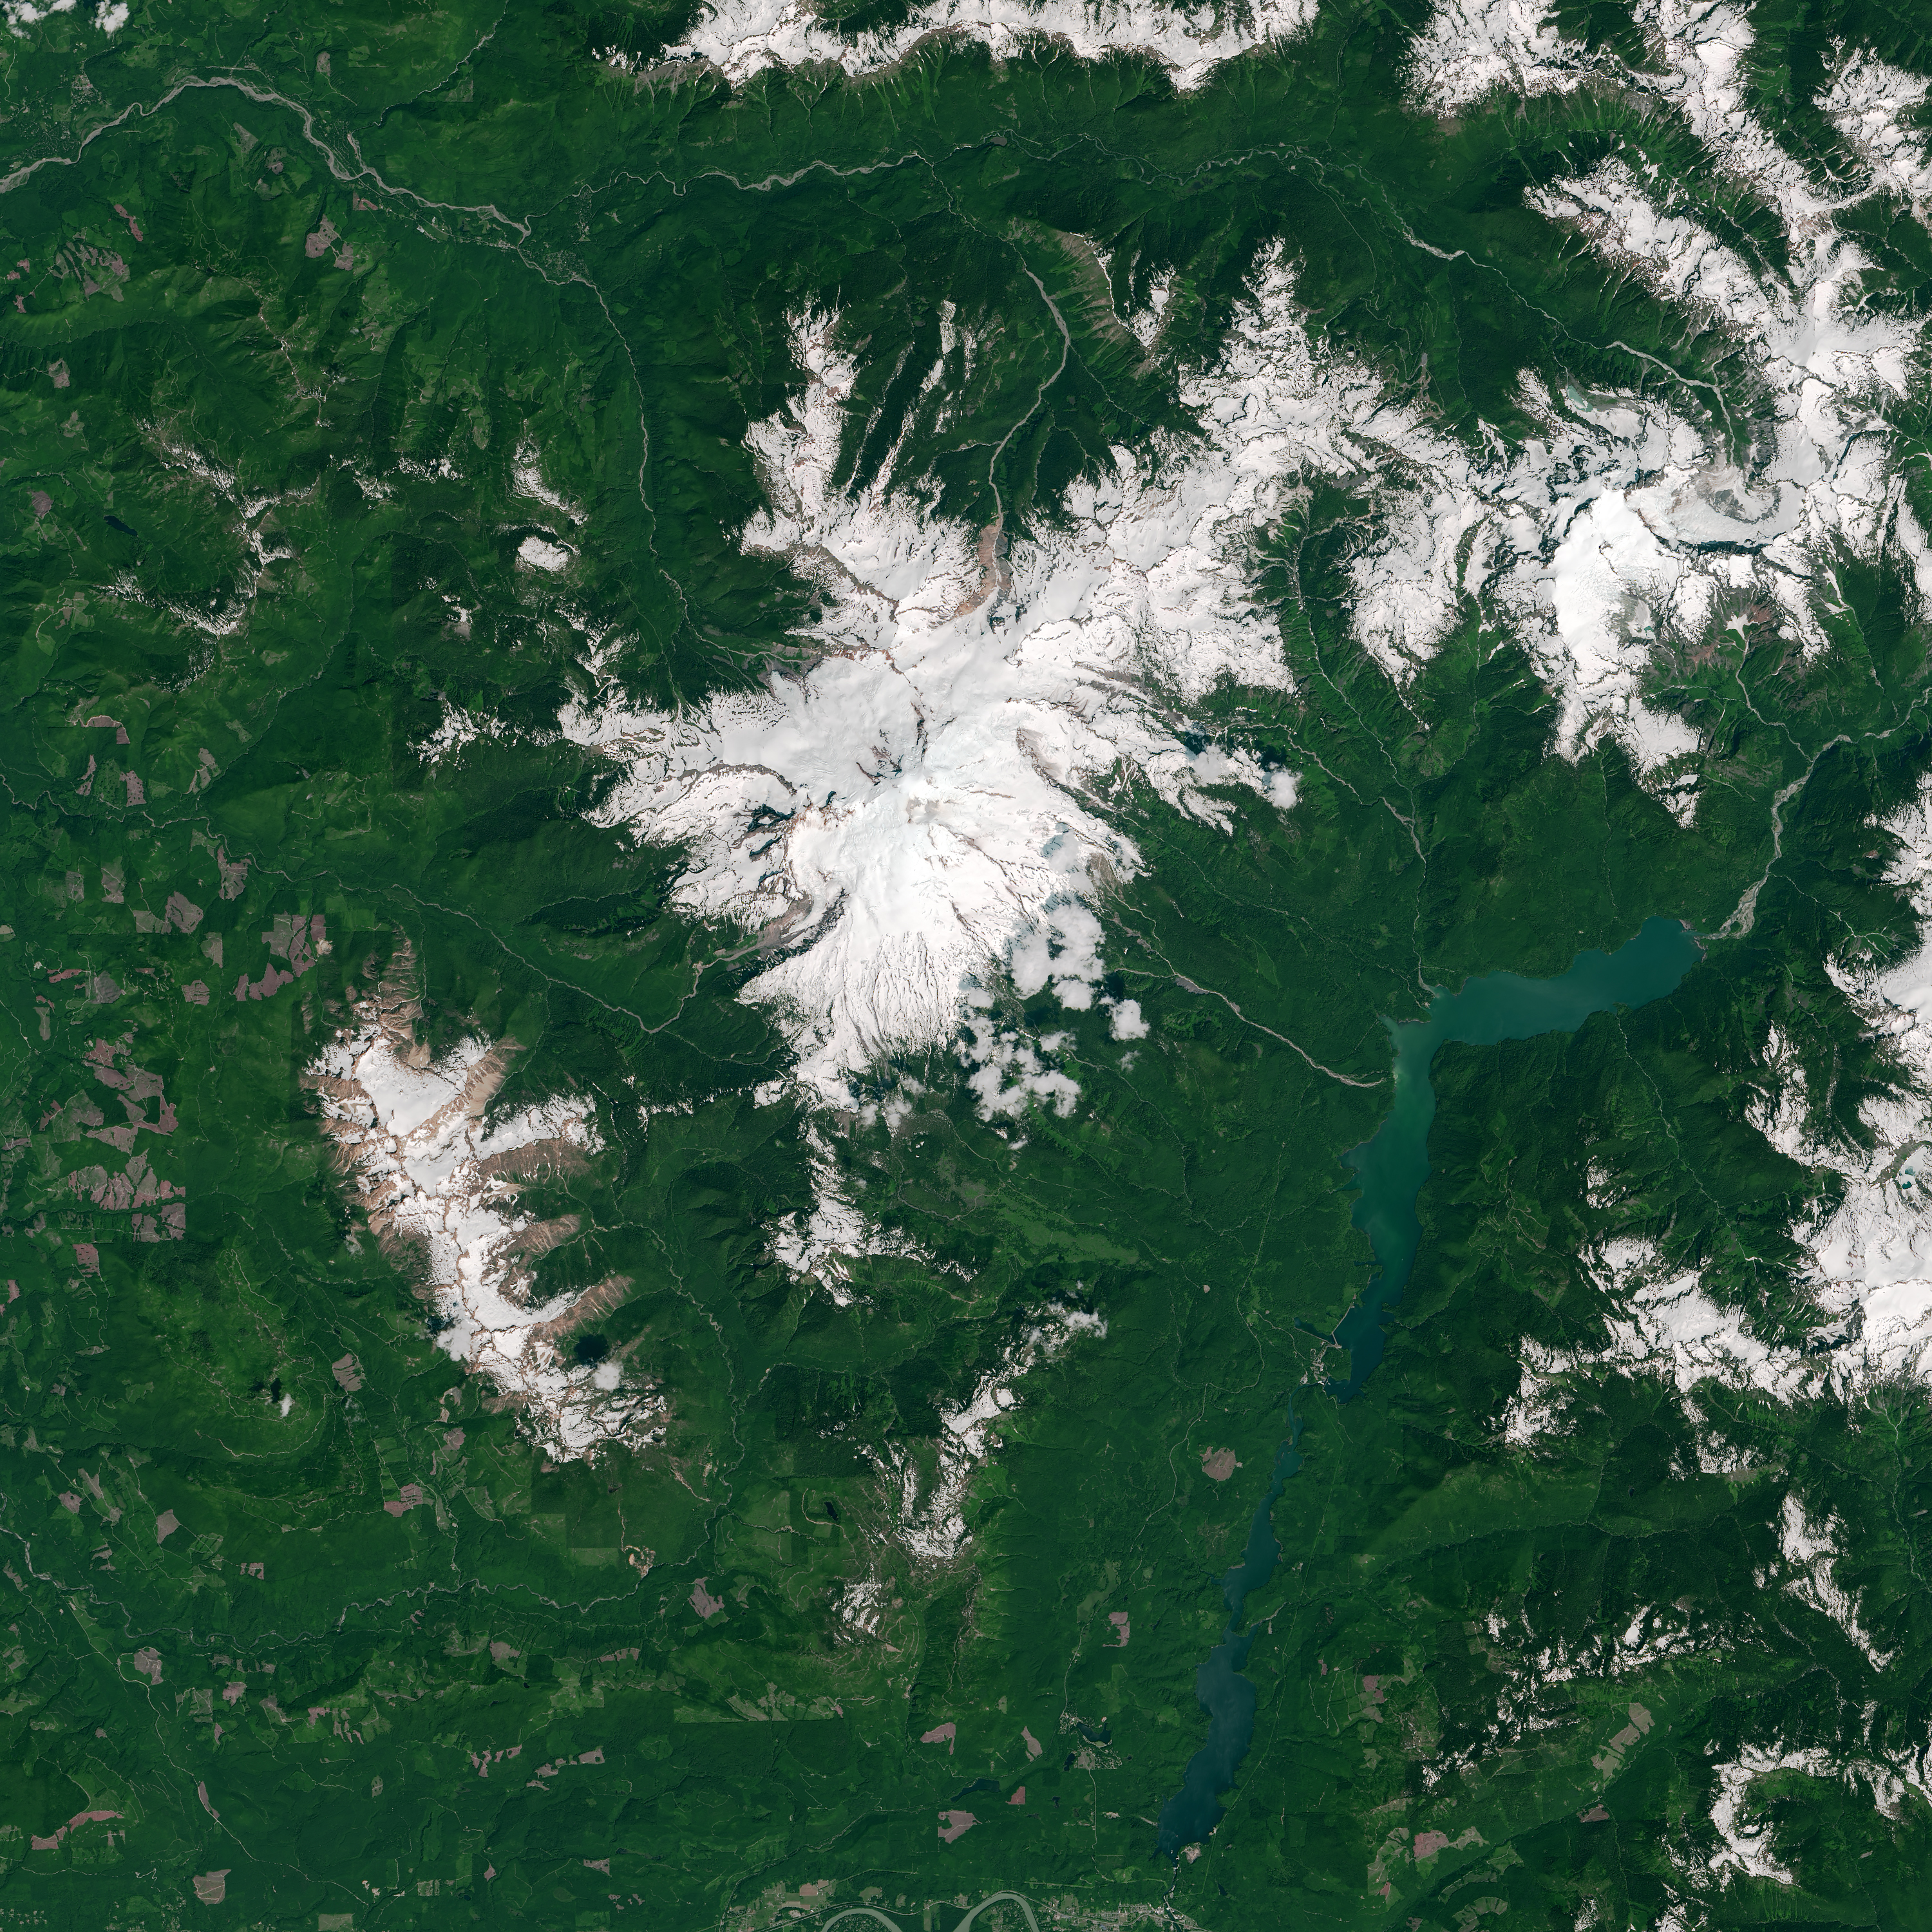 Snow Drought on Mount Baker - related image preview